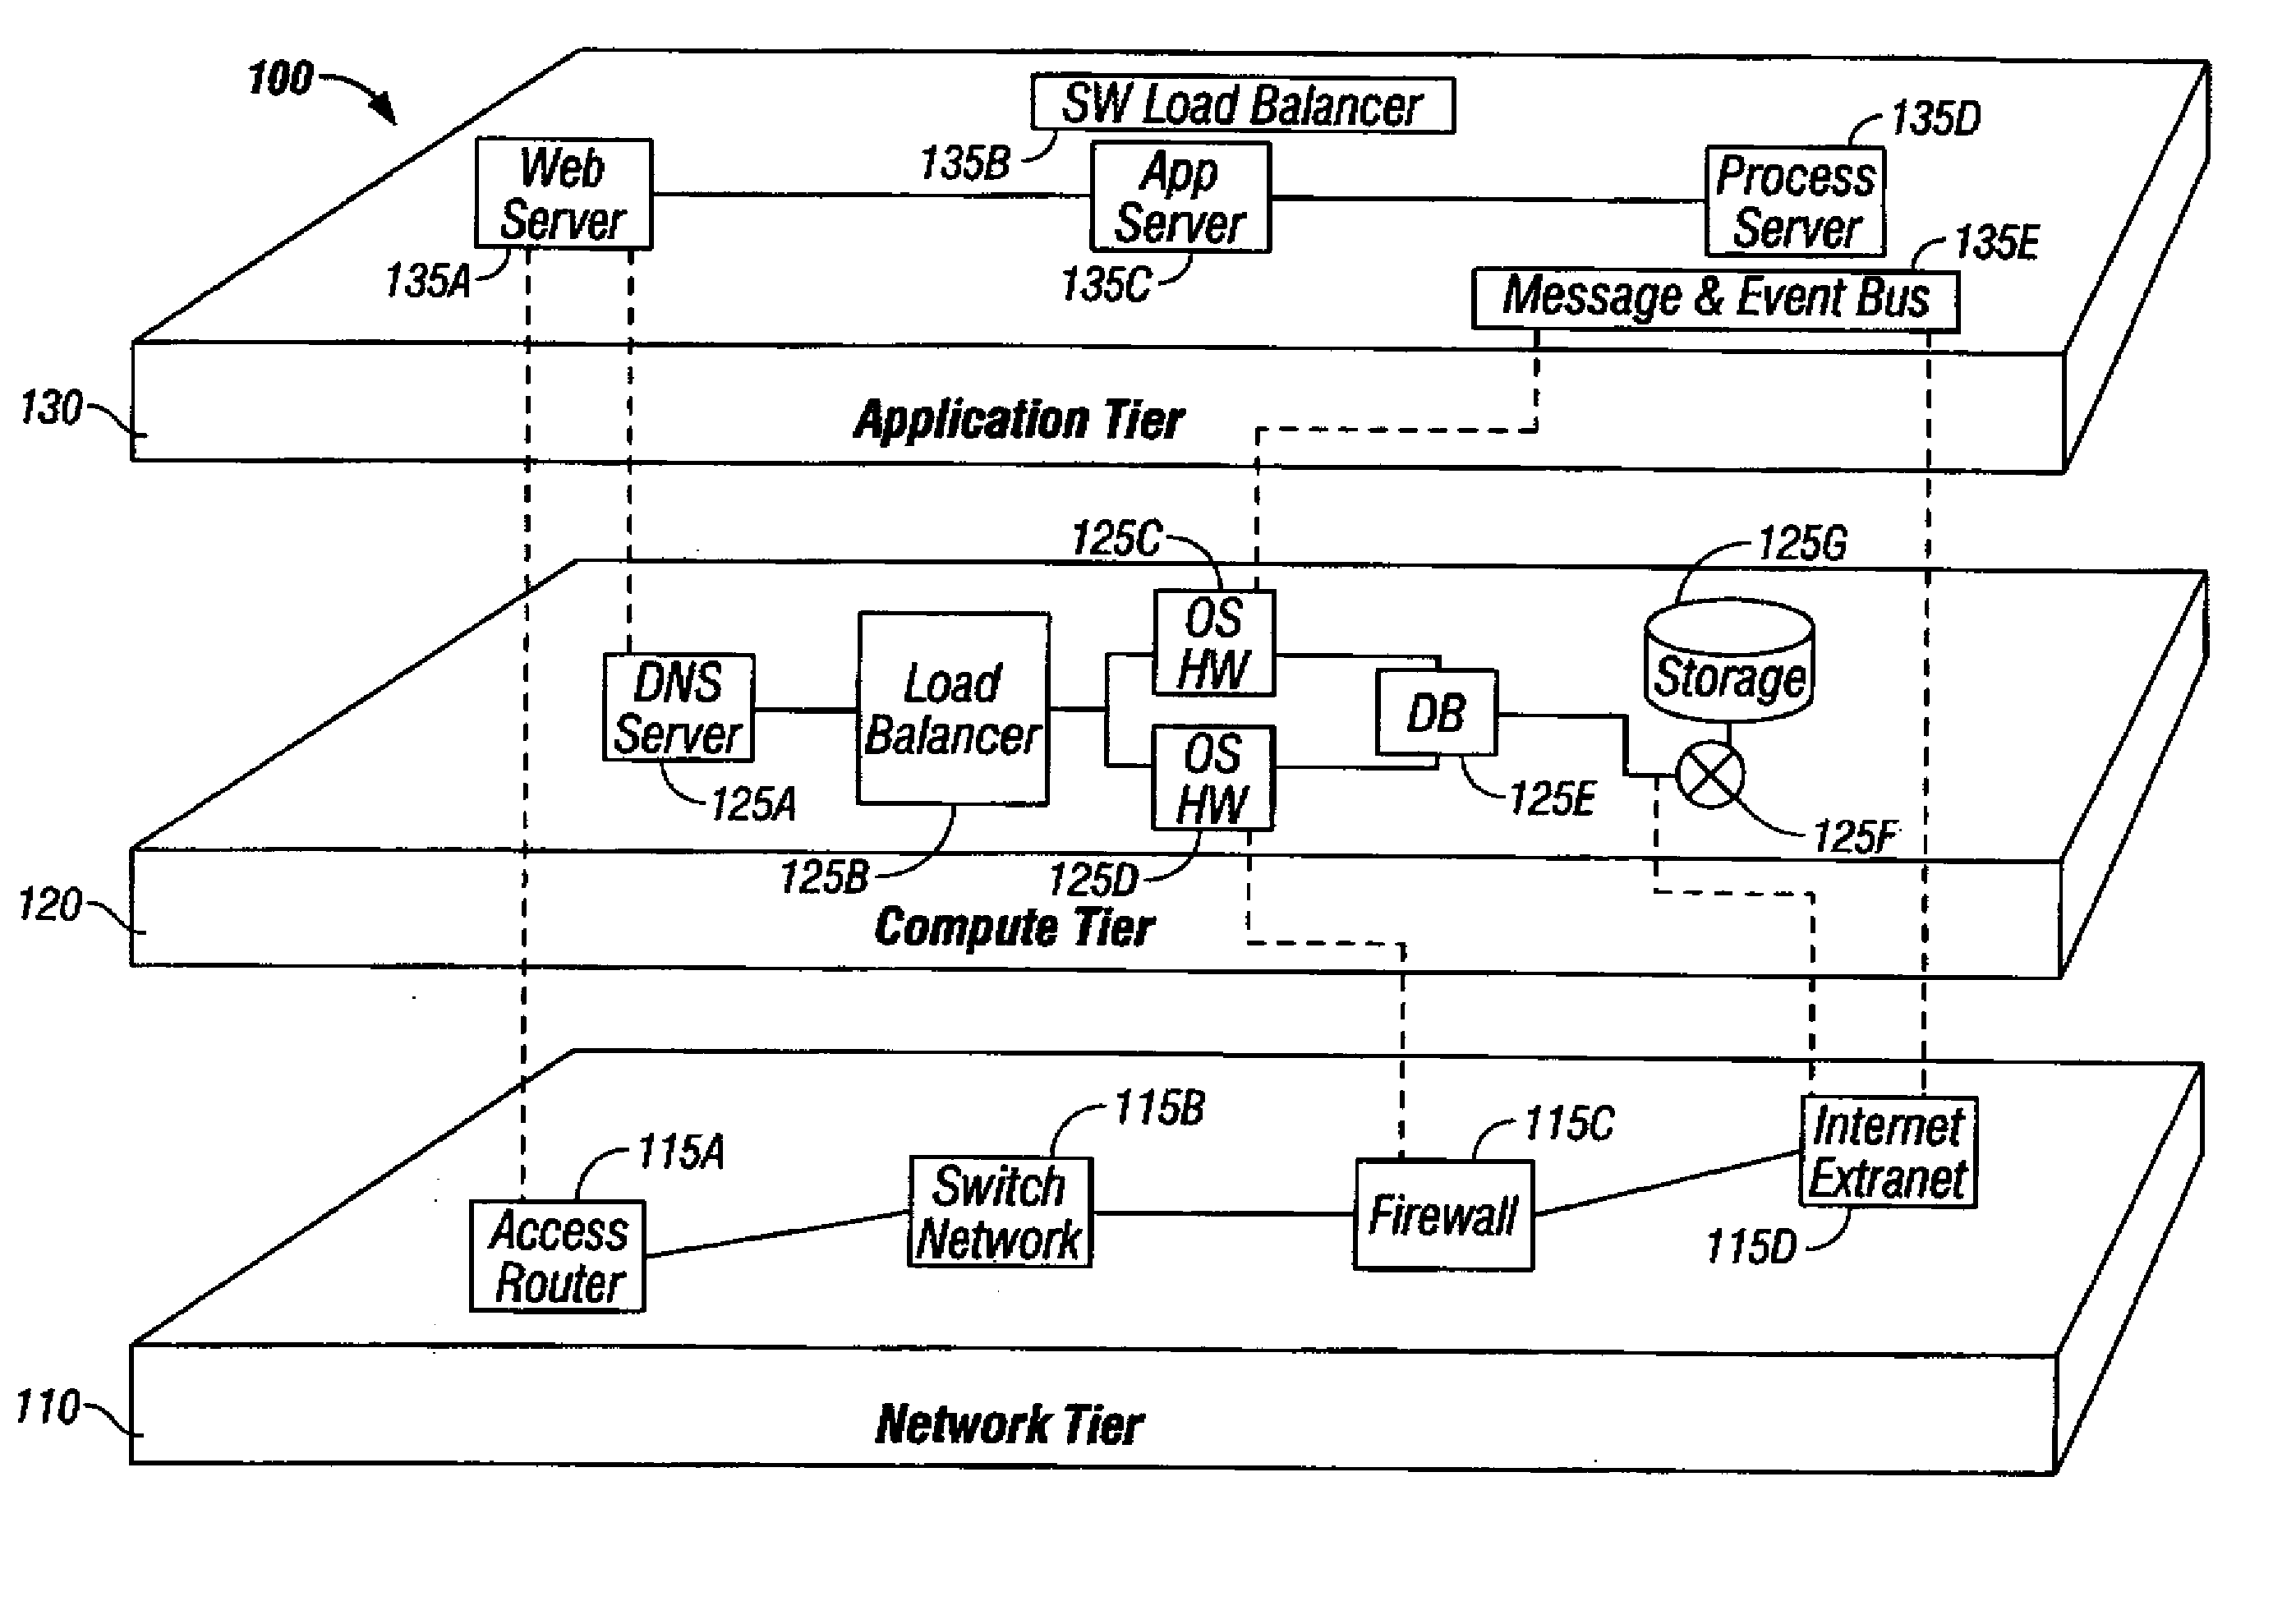 Topology mapping of a mulitier compute infrastructure